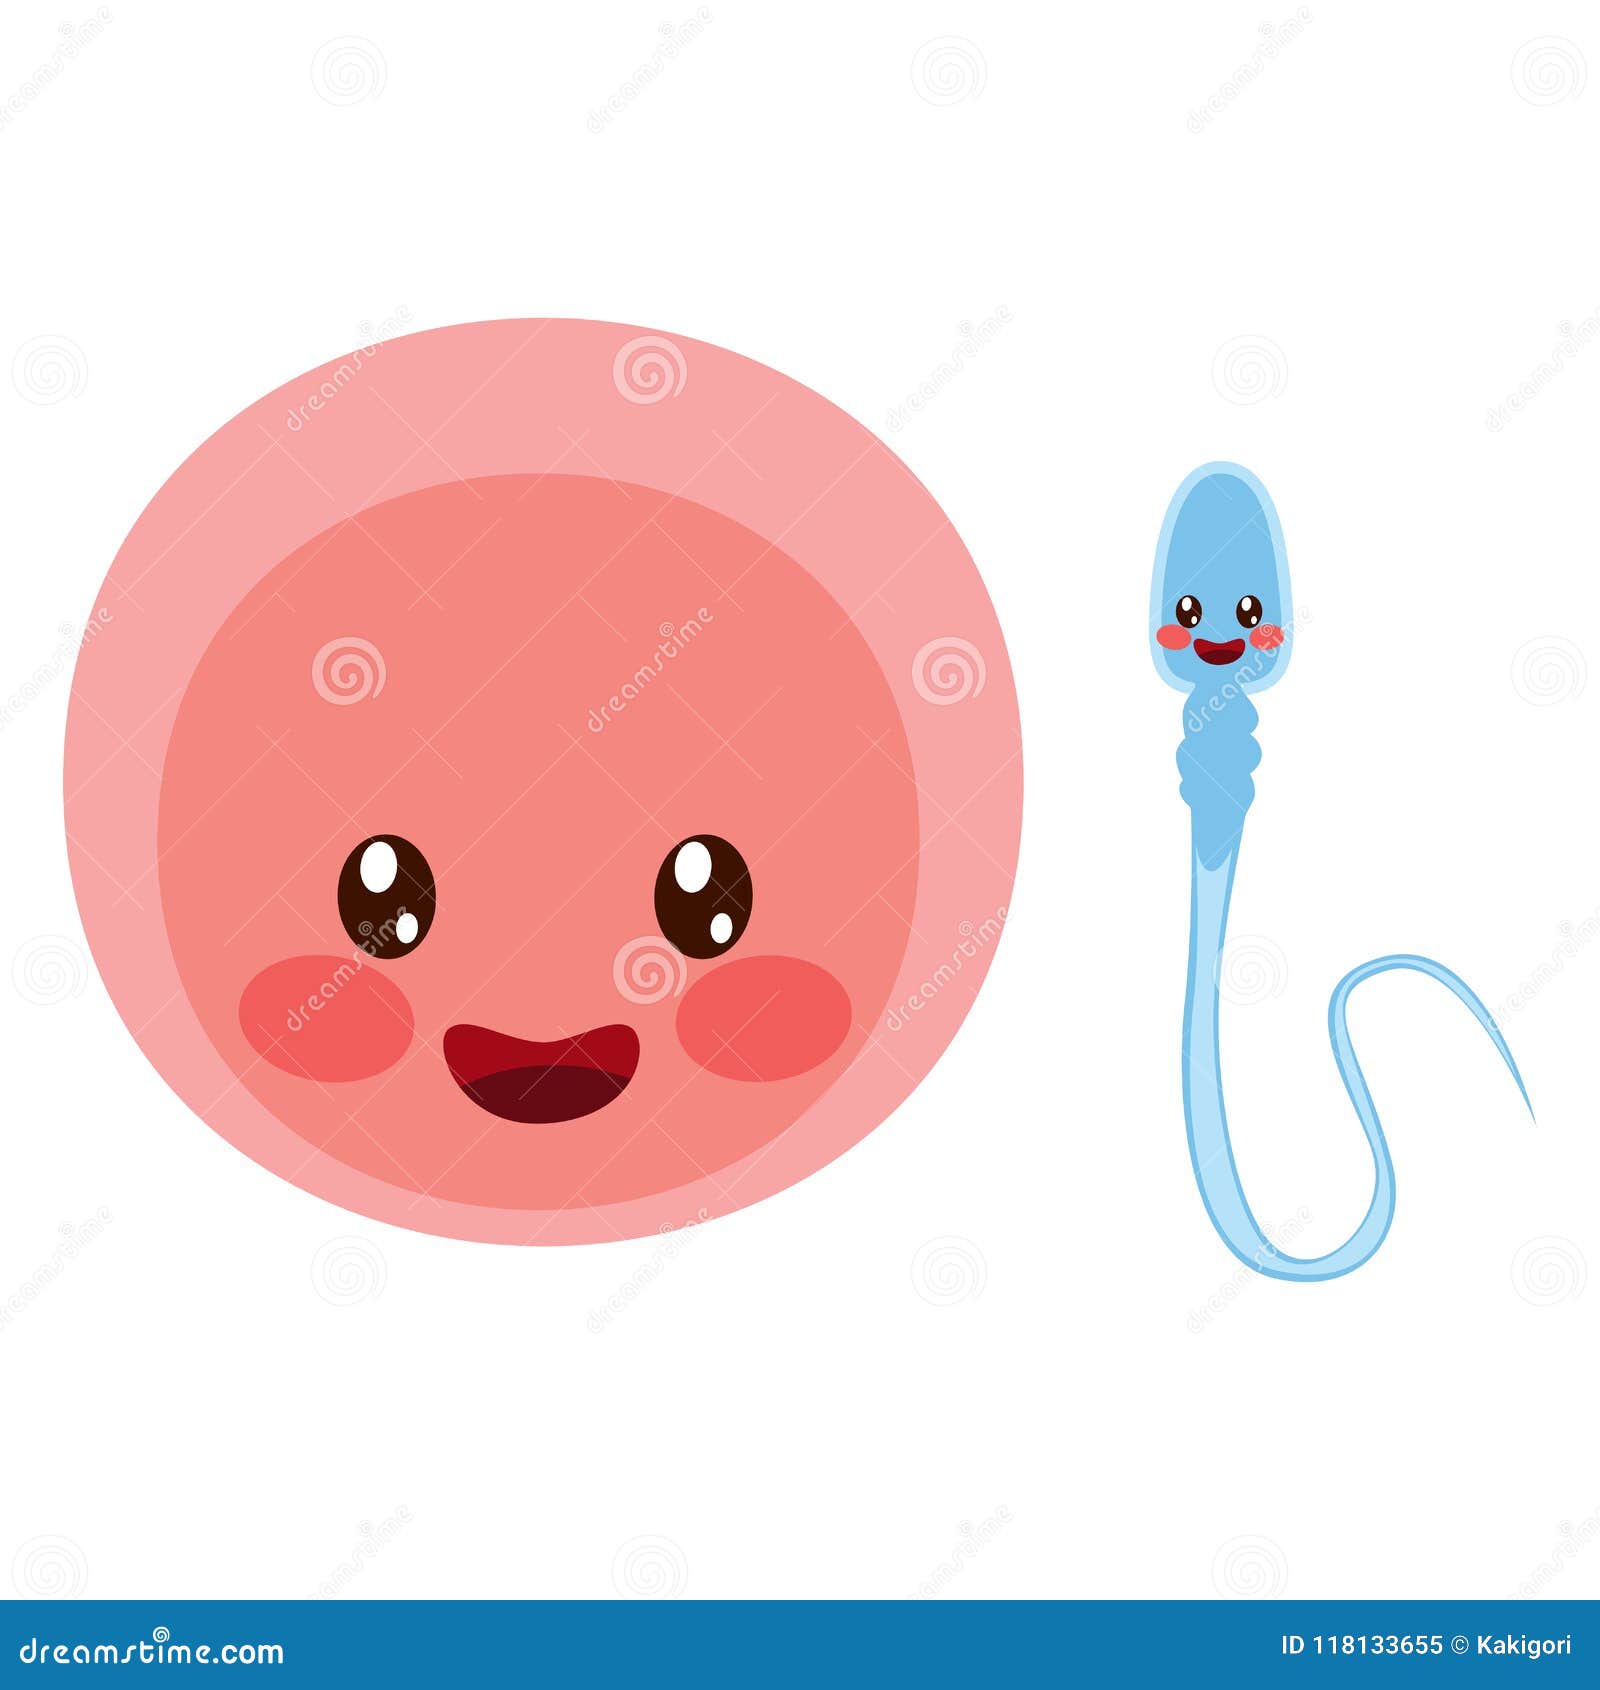 Egg Cell And Sperm Stock Vector Illustration Of Character 118133655